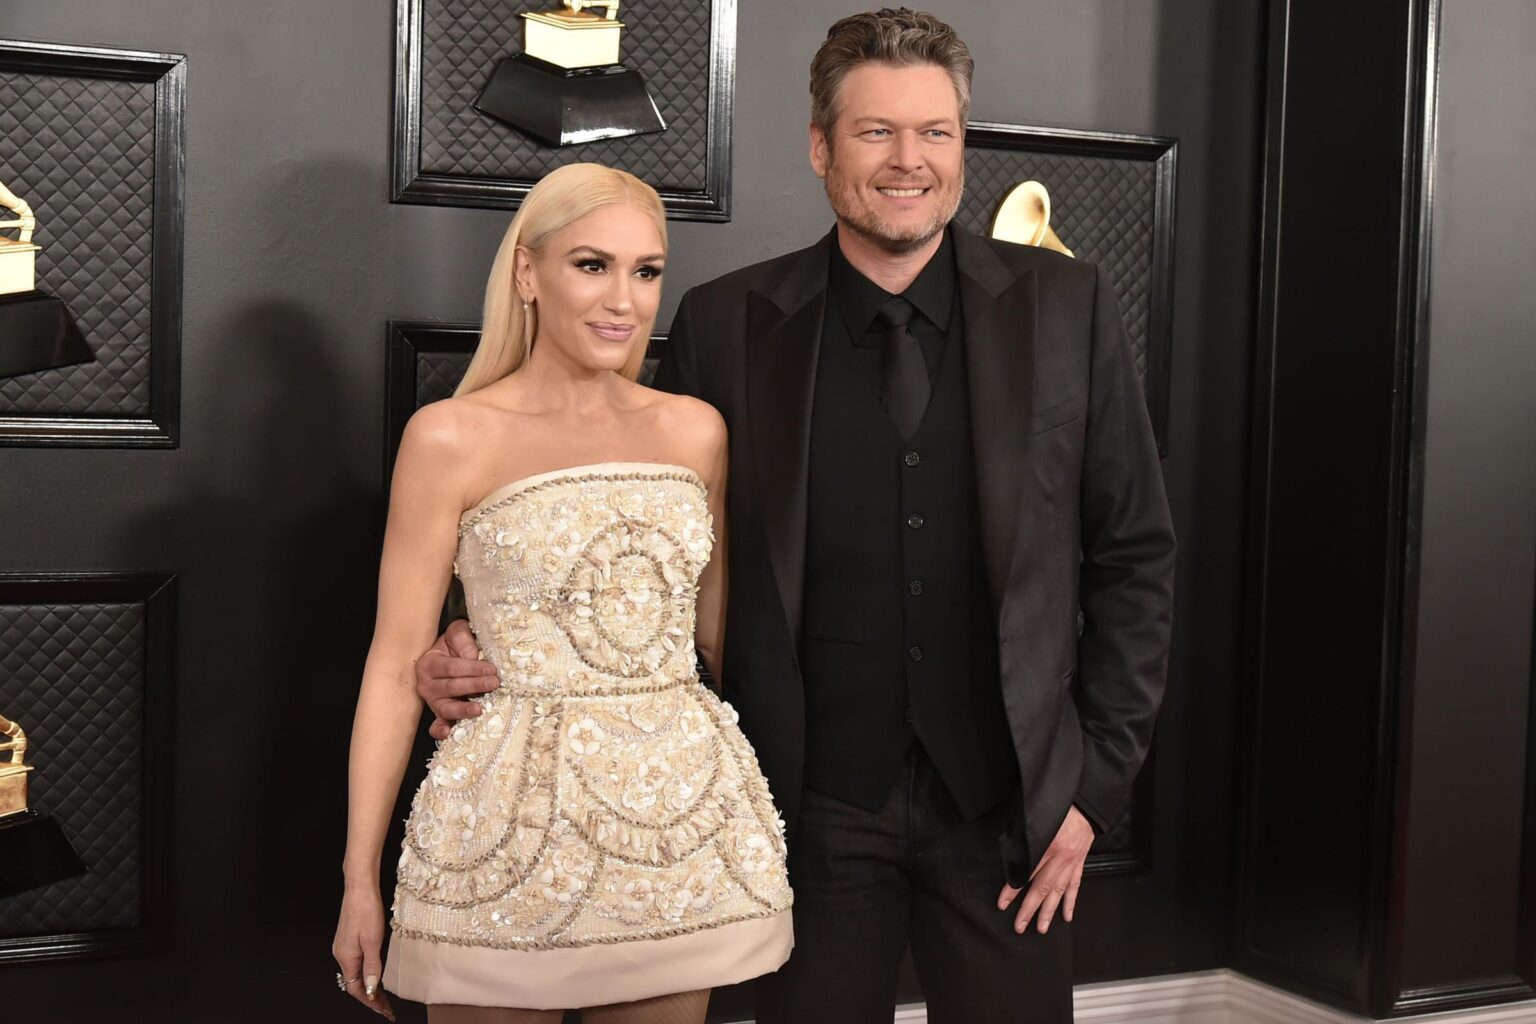 The best or the worst? Here's what we have to say about Blake Shelton and Gwen Stefani as a Hollywood couple.